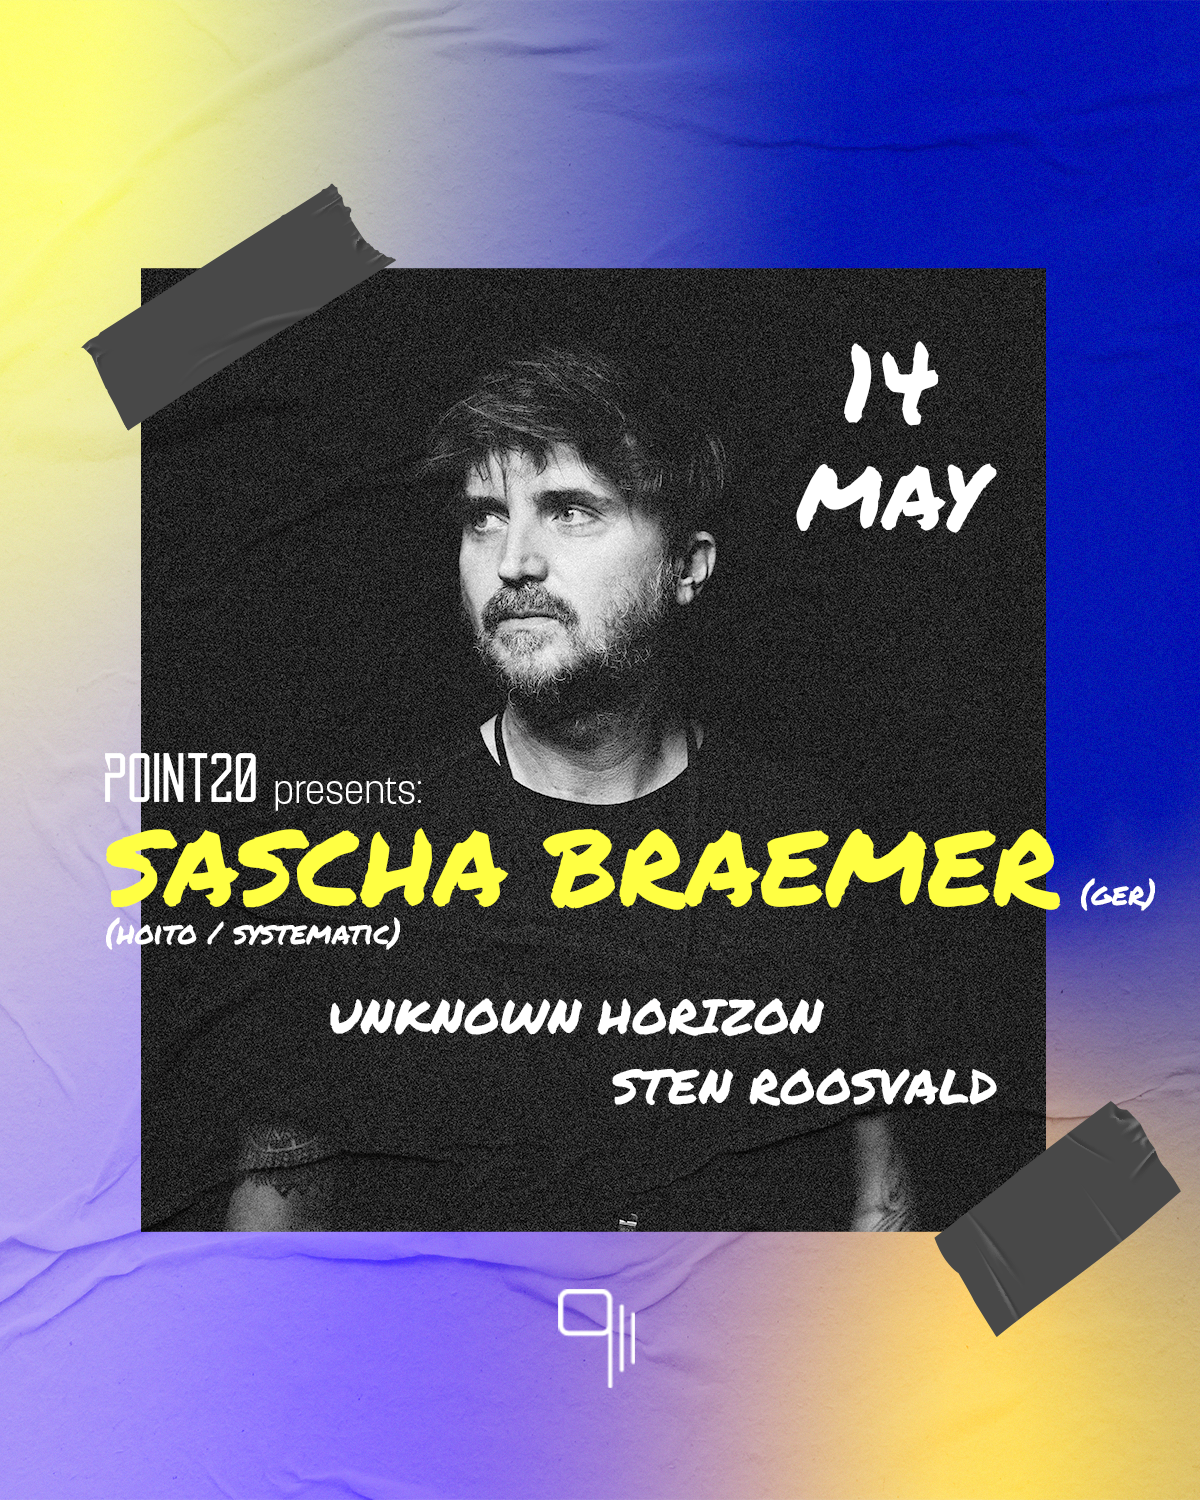 Sascha Braemer (GER) (Hoito/Systematic) - Flyer front